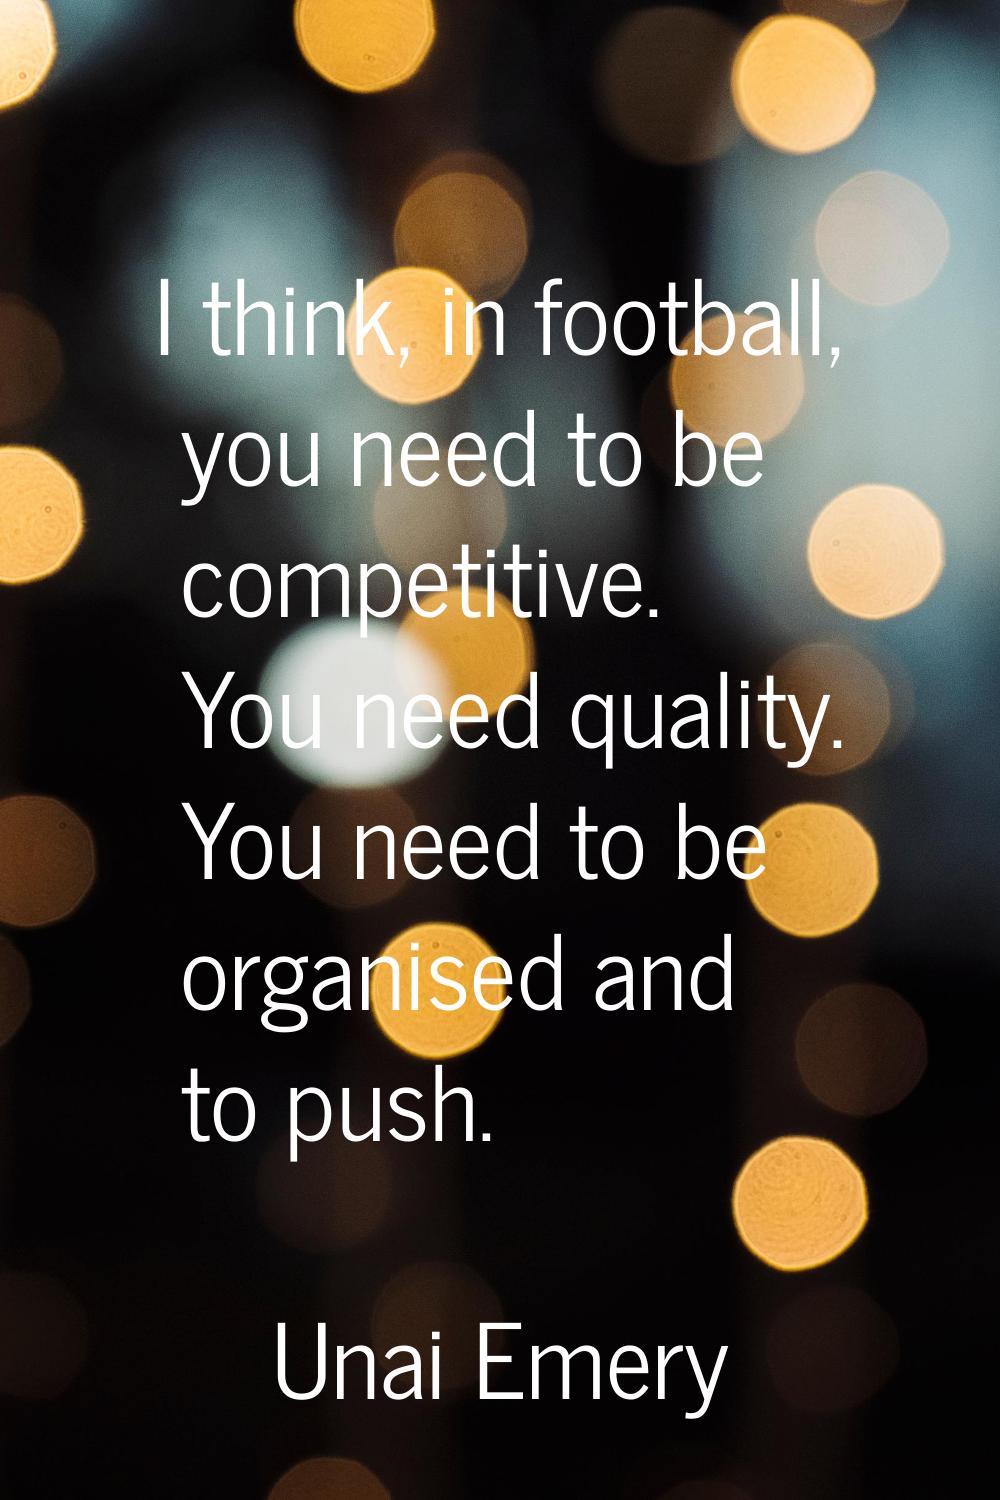 I think, in football, you need to be competitive. You need quality. You need to be organised and to